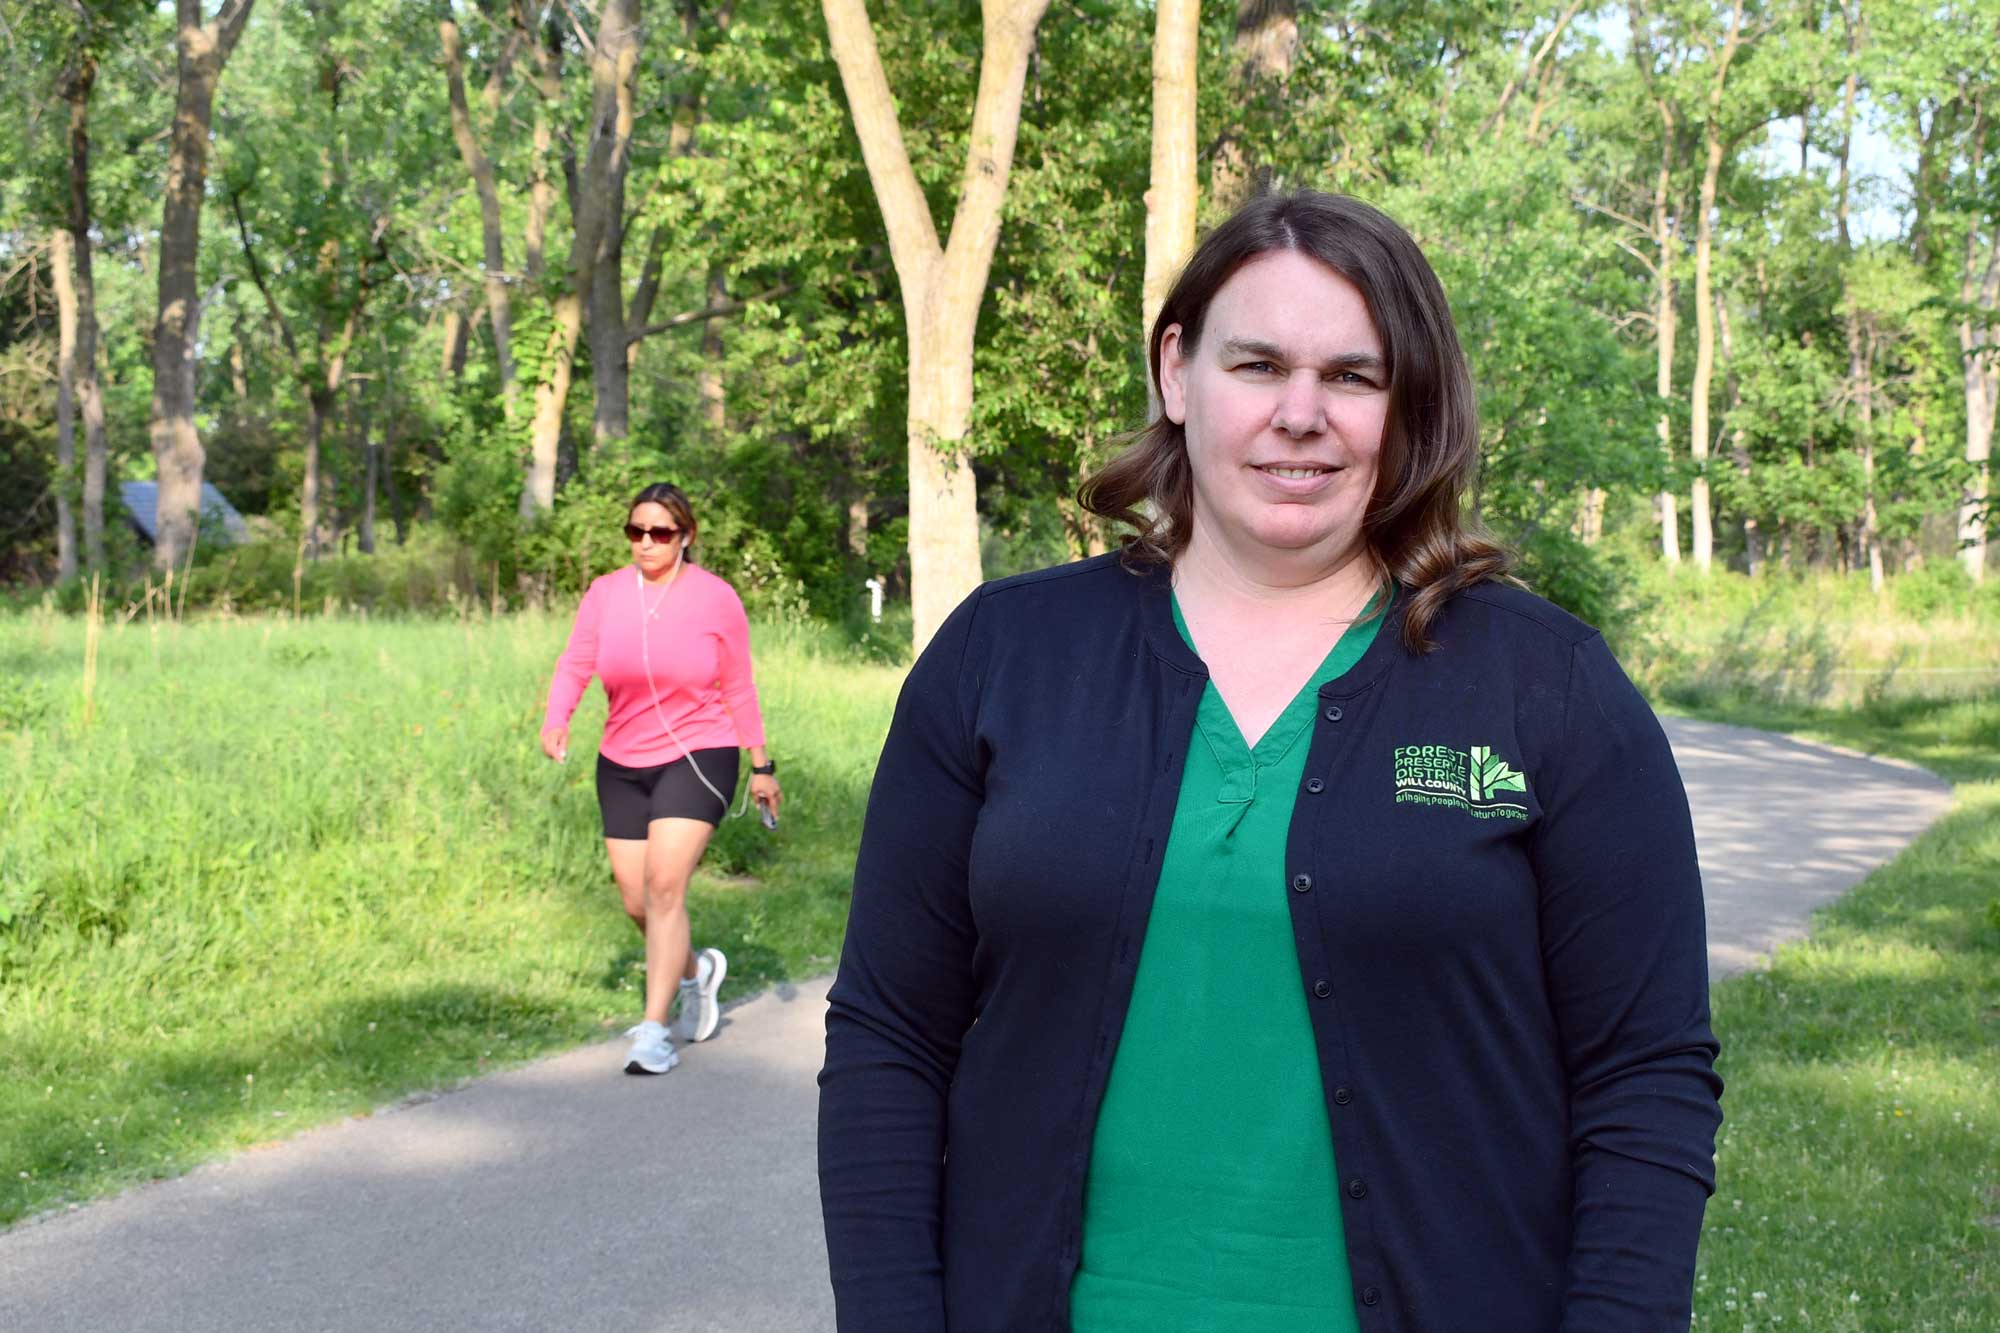 A woman poses for a photo on a trail while a runner passes by.